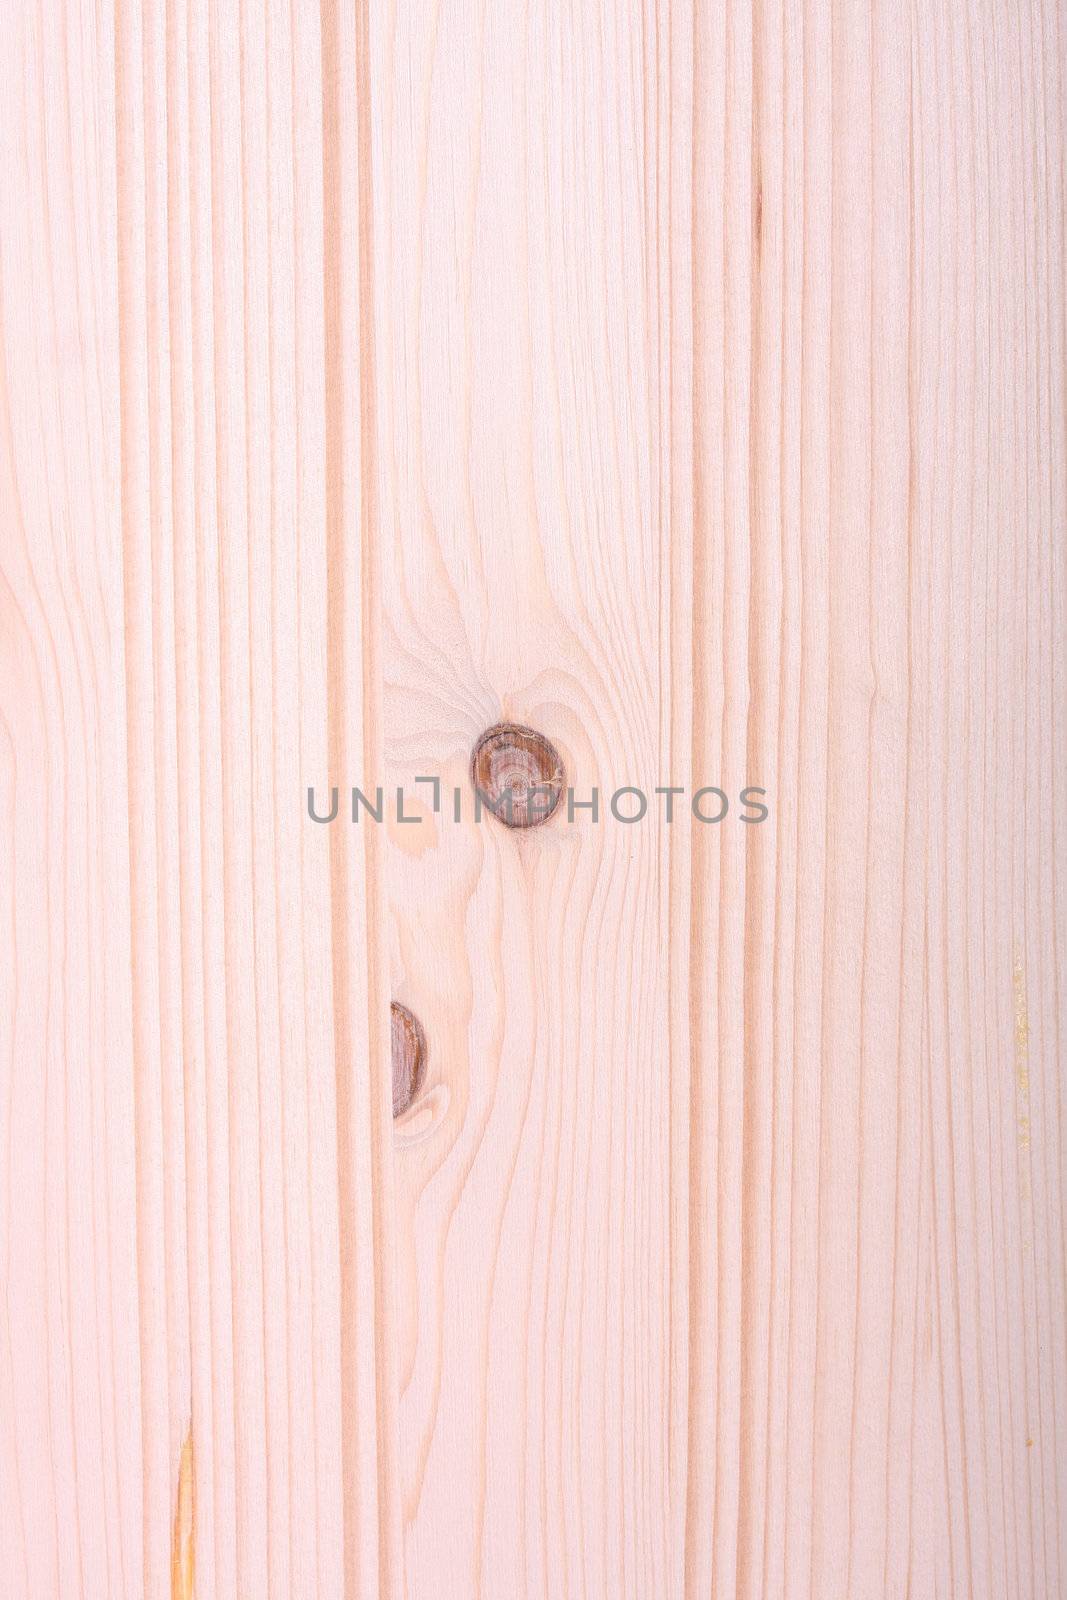 Close up shot of wooden texture background